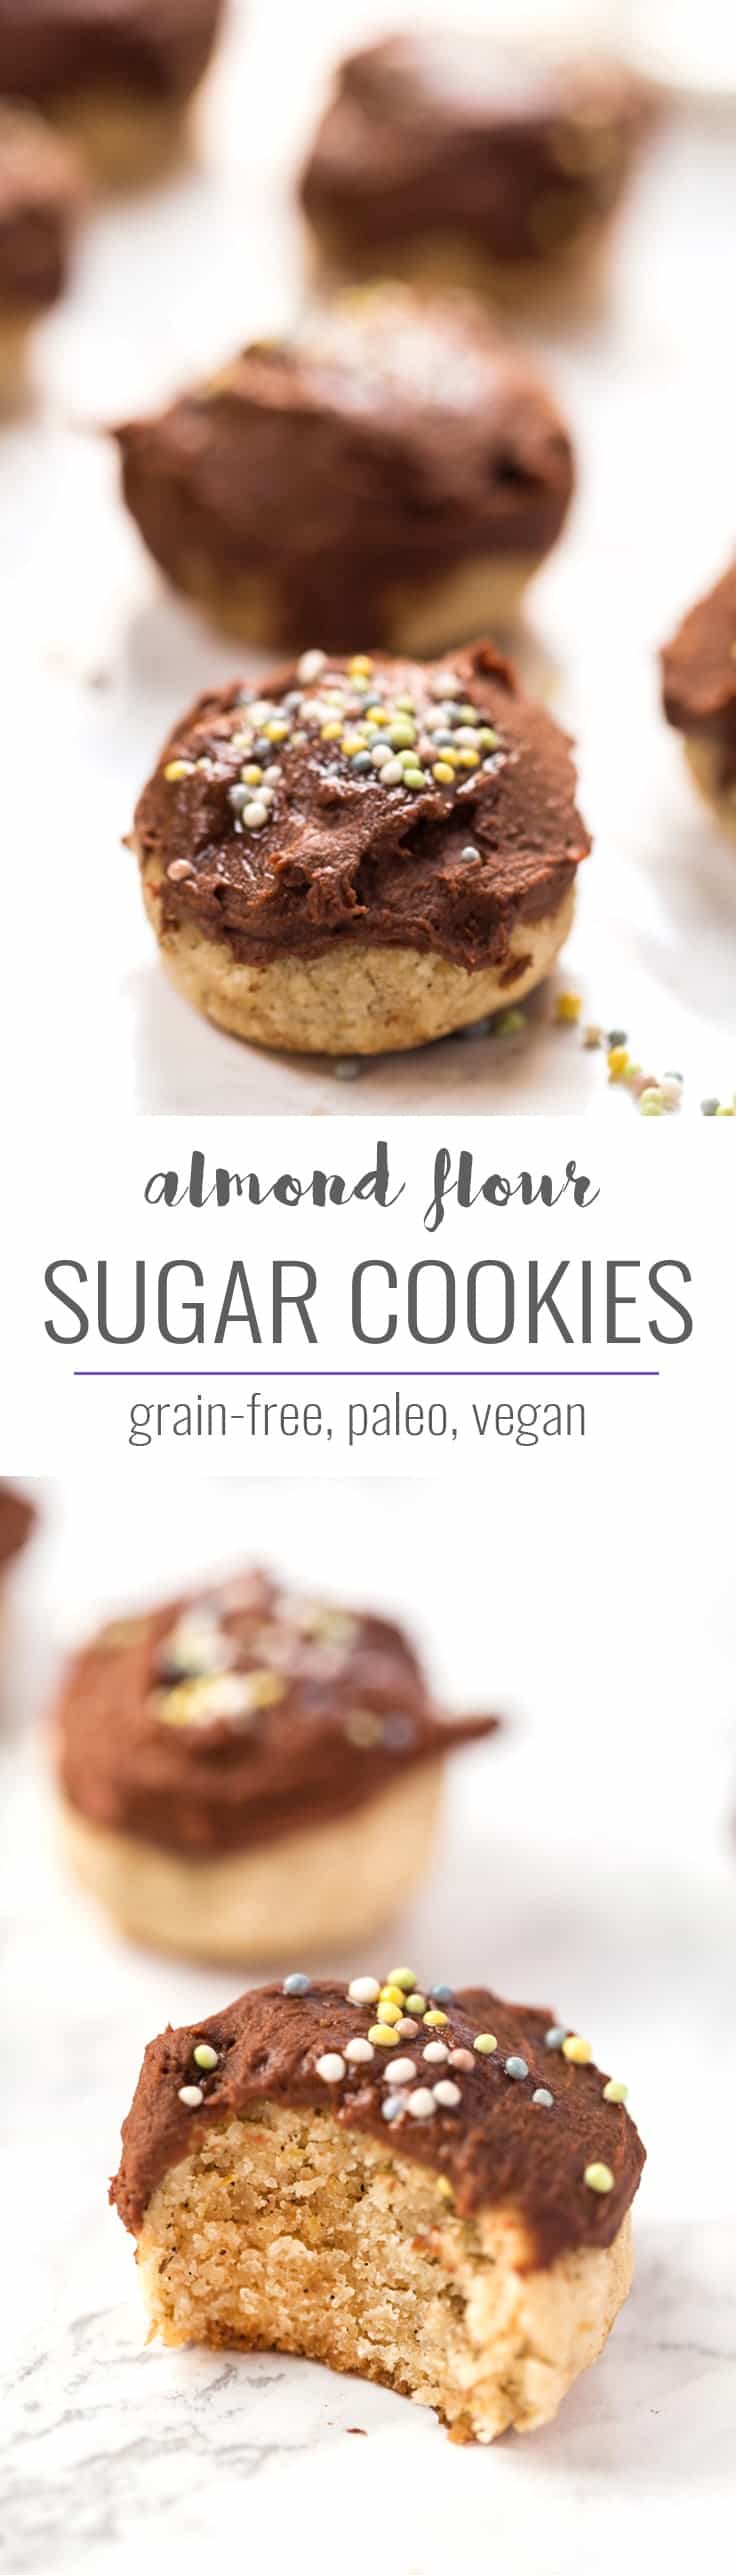 These CHEWY & HEALTHY almond flour sugar cookies are a healthy sweet treat. They're grain-free, paleo, vegan and are even topped with a healthy chocolate frosting!